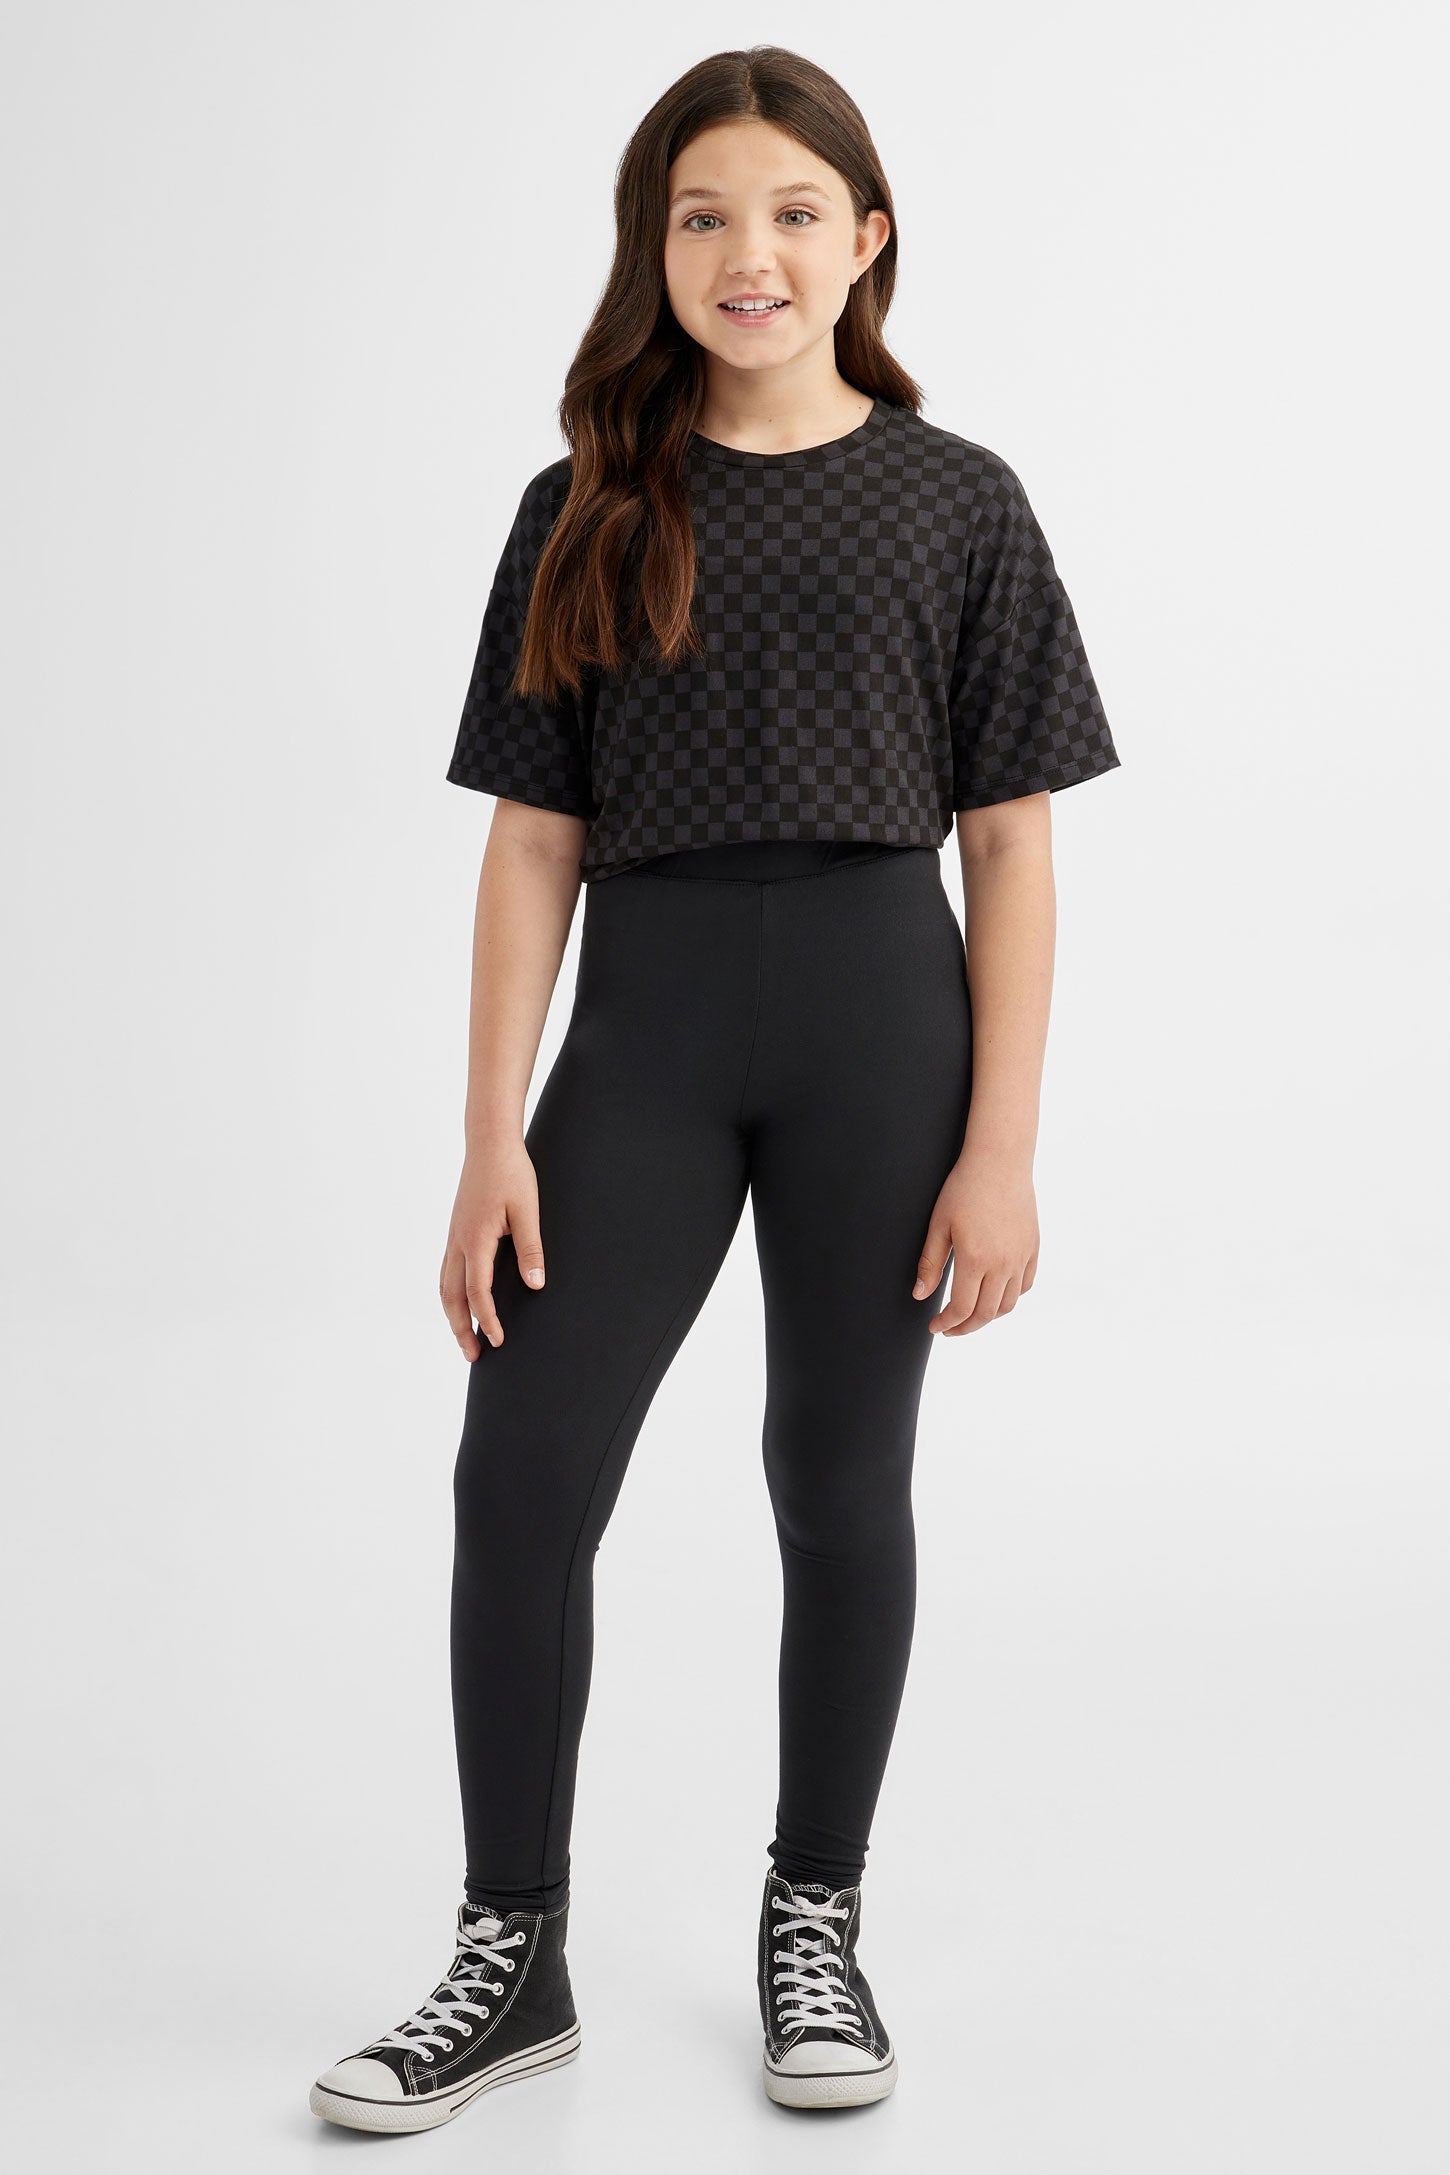 teens in black leggings, teens in black leggings Suppliers and